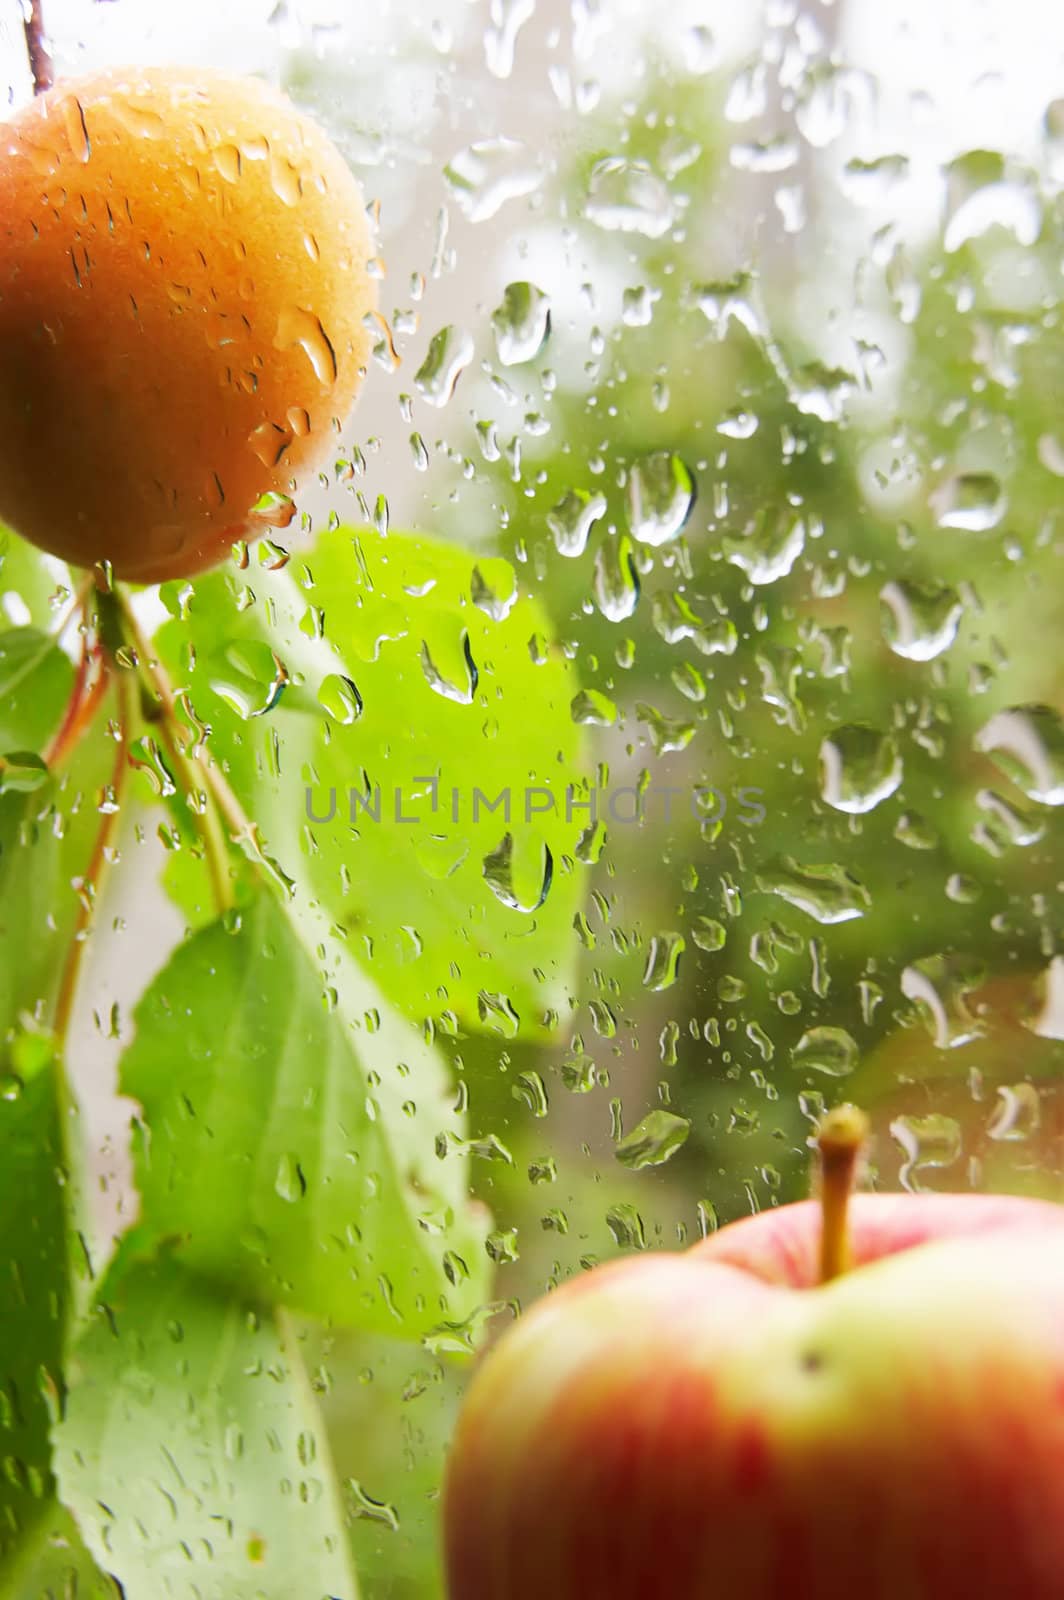 Apricot and apple on wet screen background